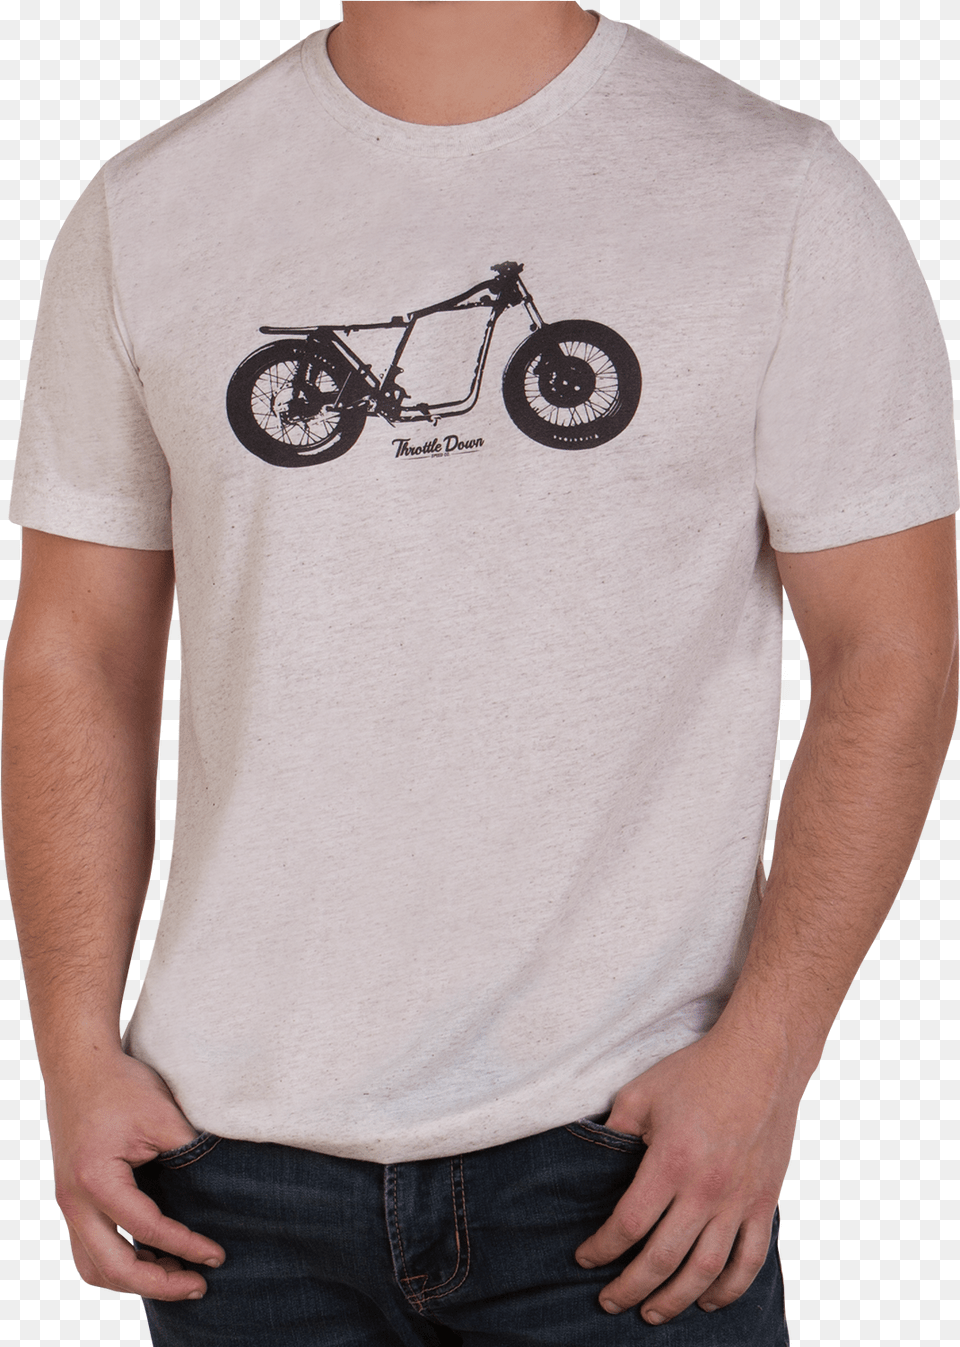 Small Oatmeal Canvas, Clothing, T-shirt, Machine, Wheel Png Image